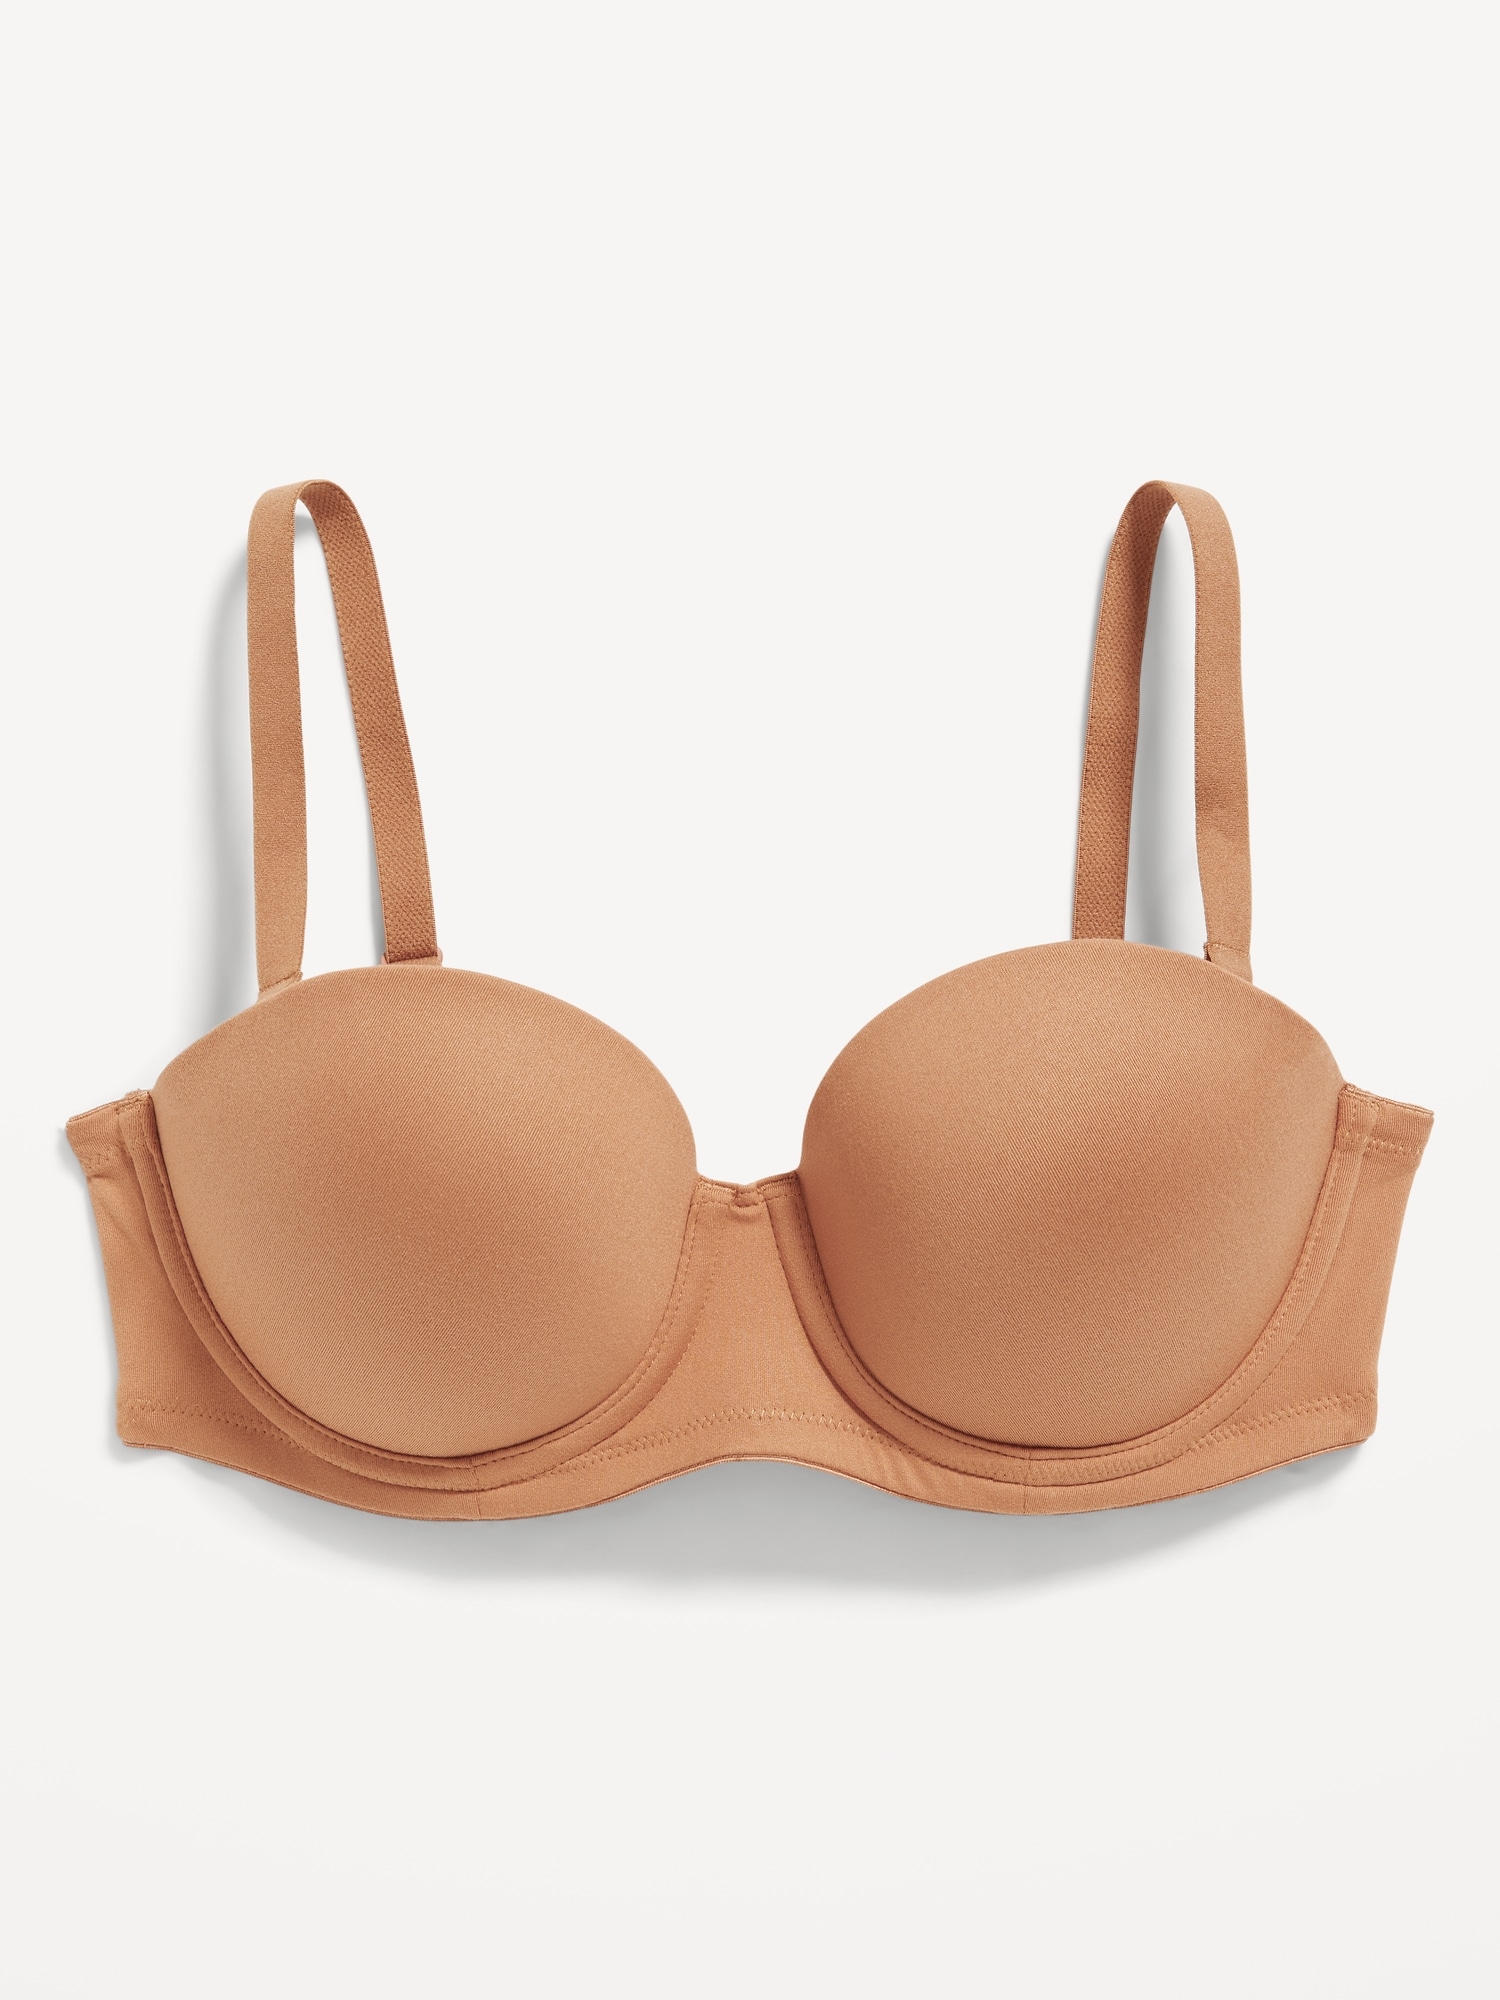 Wacoal Red Carpet Convertible Strapless Bra review: It's the best bra I own  - Reviewed